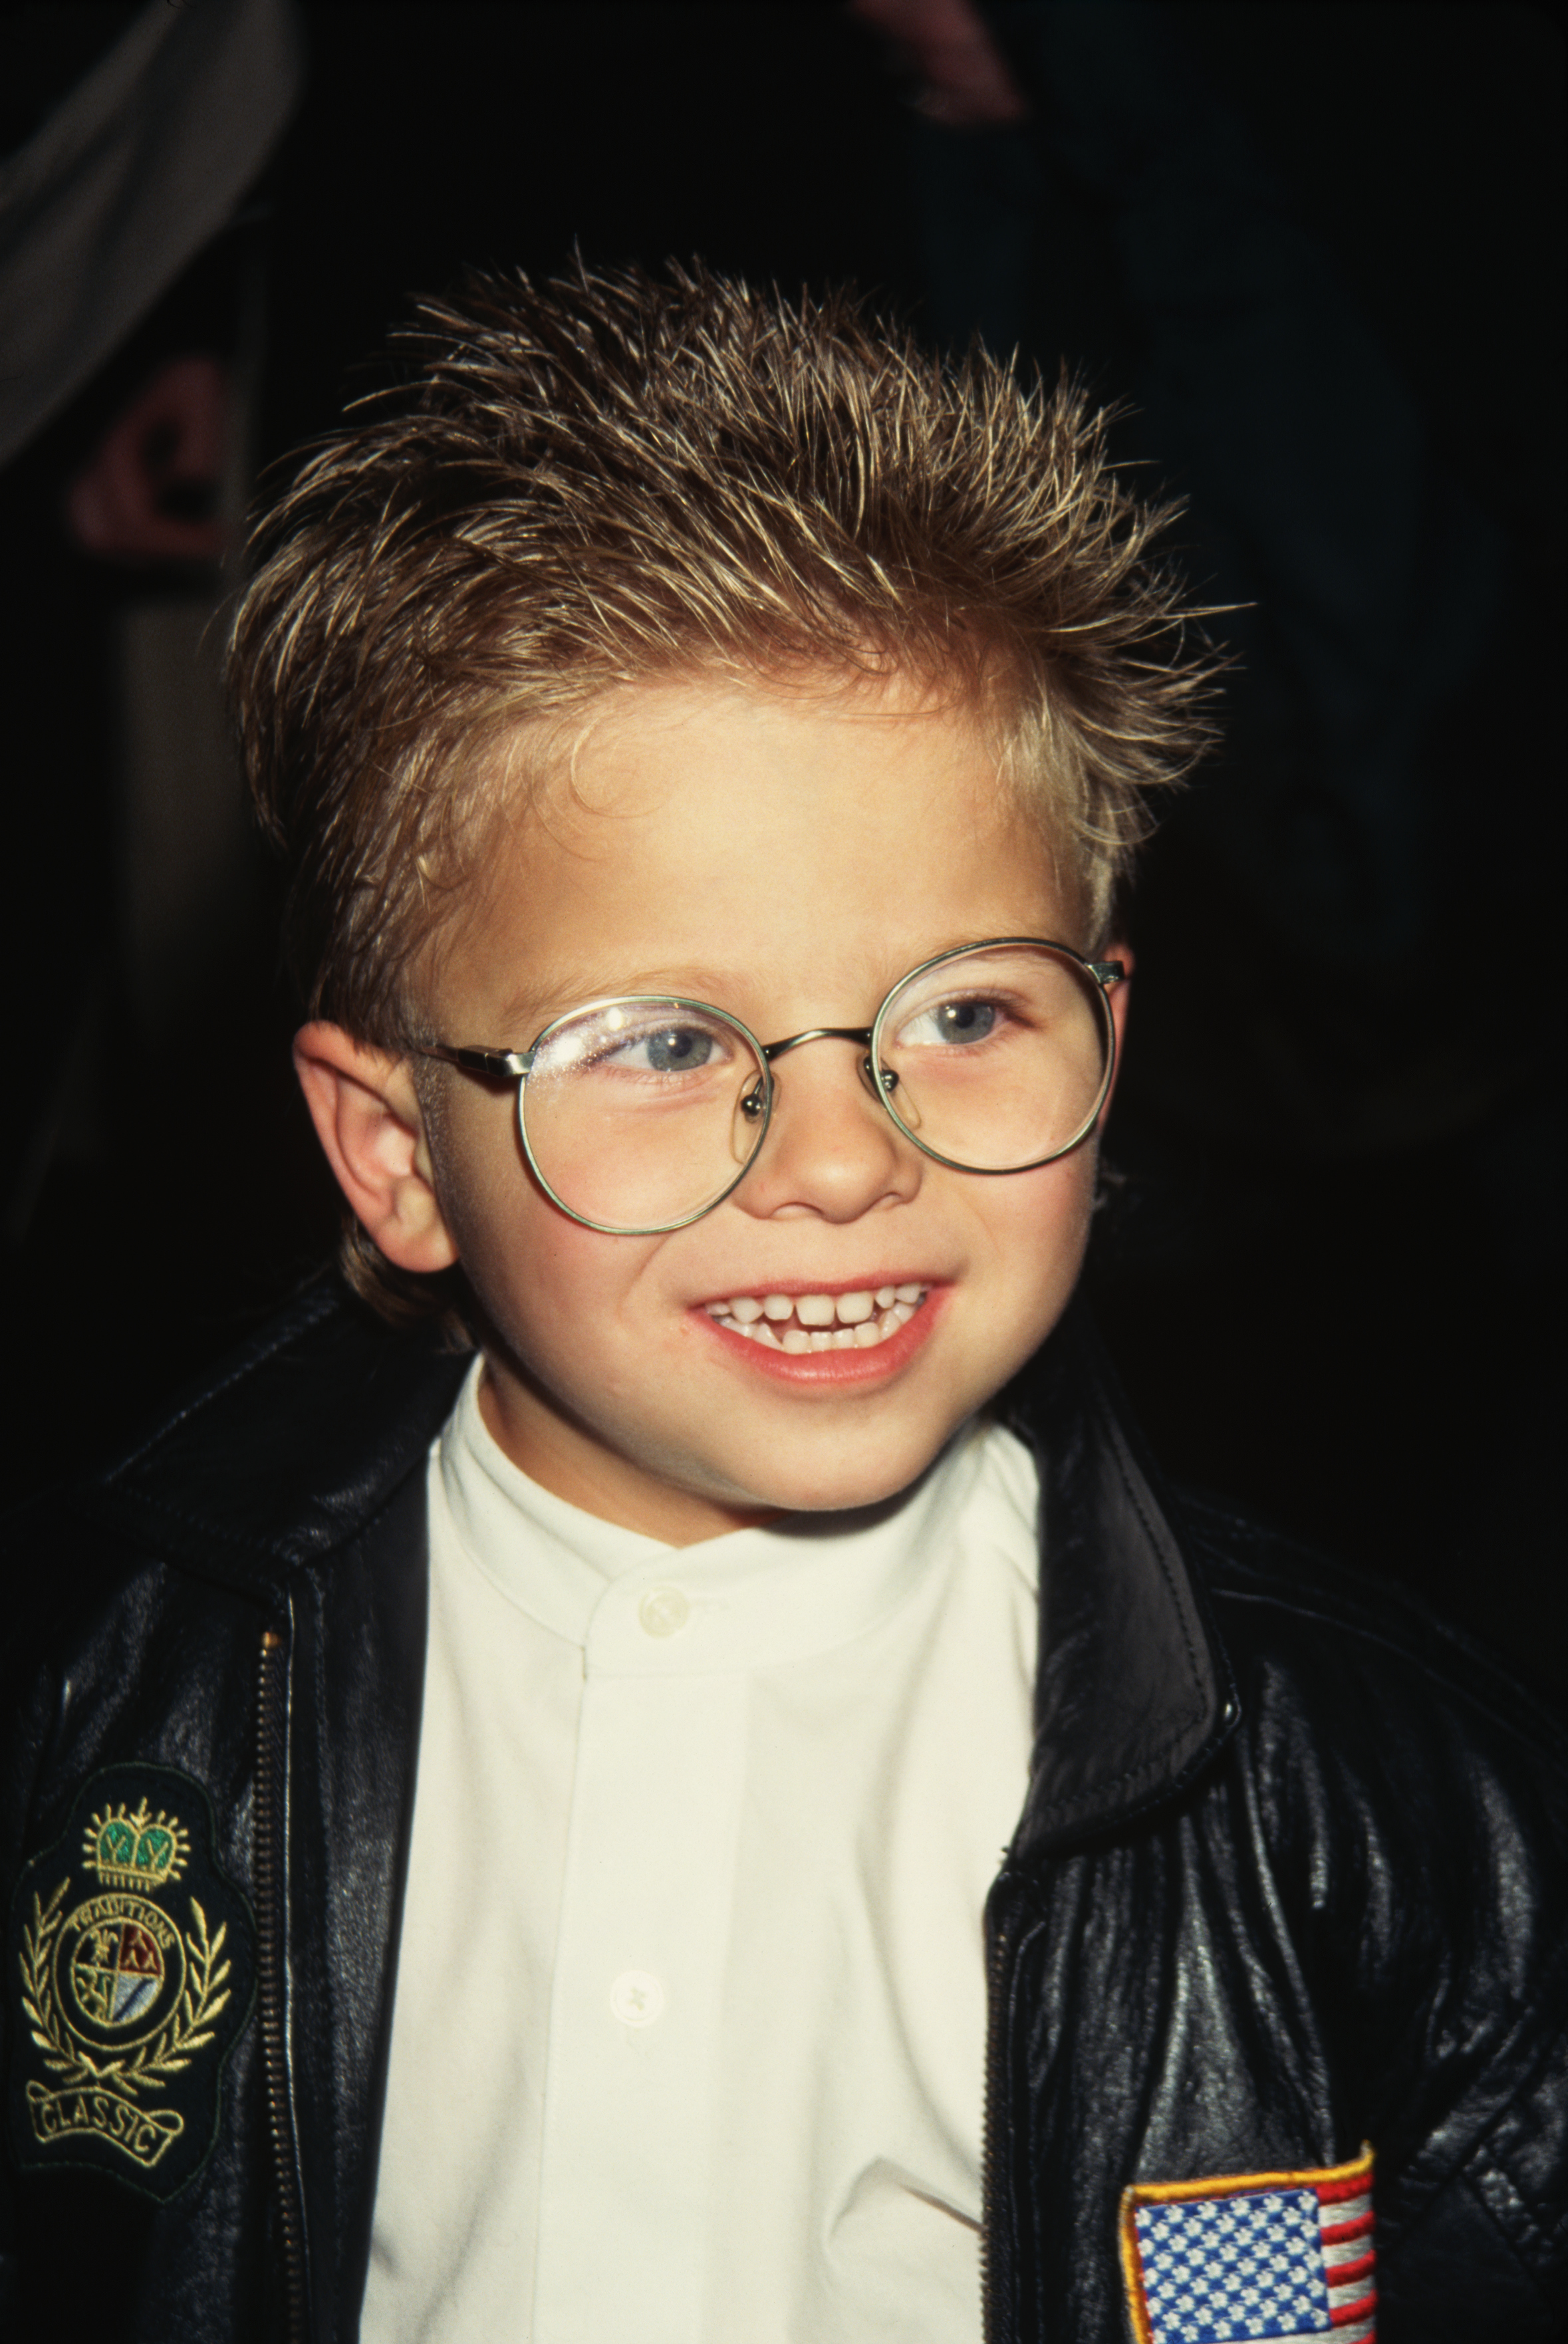 The child actor attending an event in 1996 | Source: Getty Images